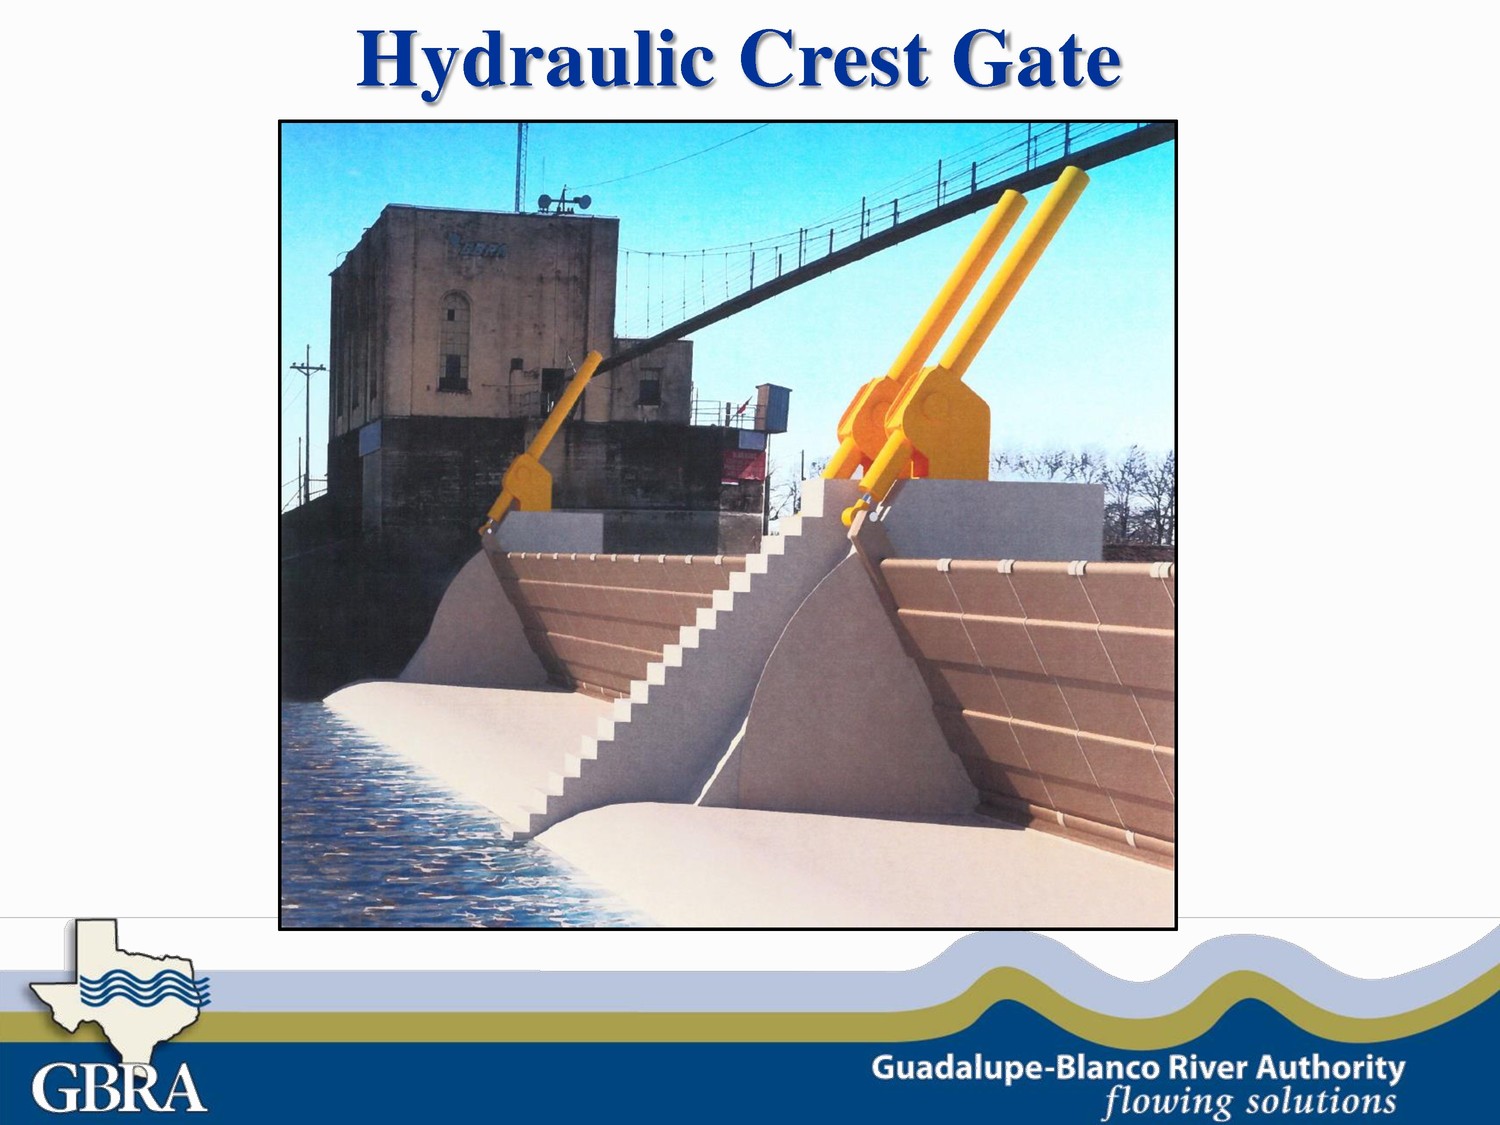 When the time comes, GBRA will be installing a hydraulic crest gate on the dam at Lake Wood. Authority staff claimed they will take at least a year of soil sampling to analyze before they can move forward.